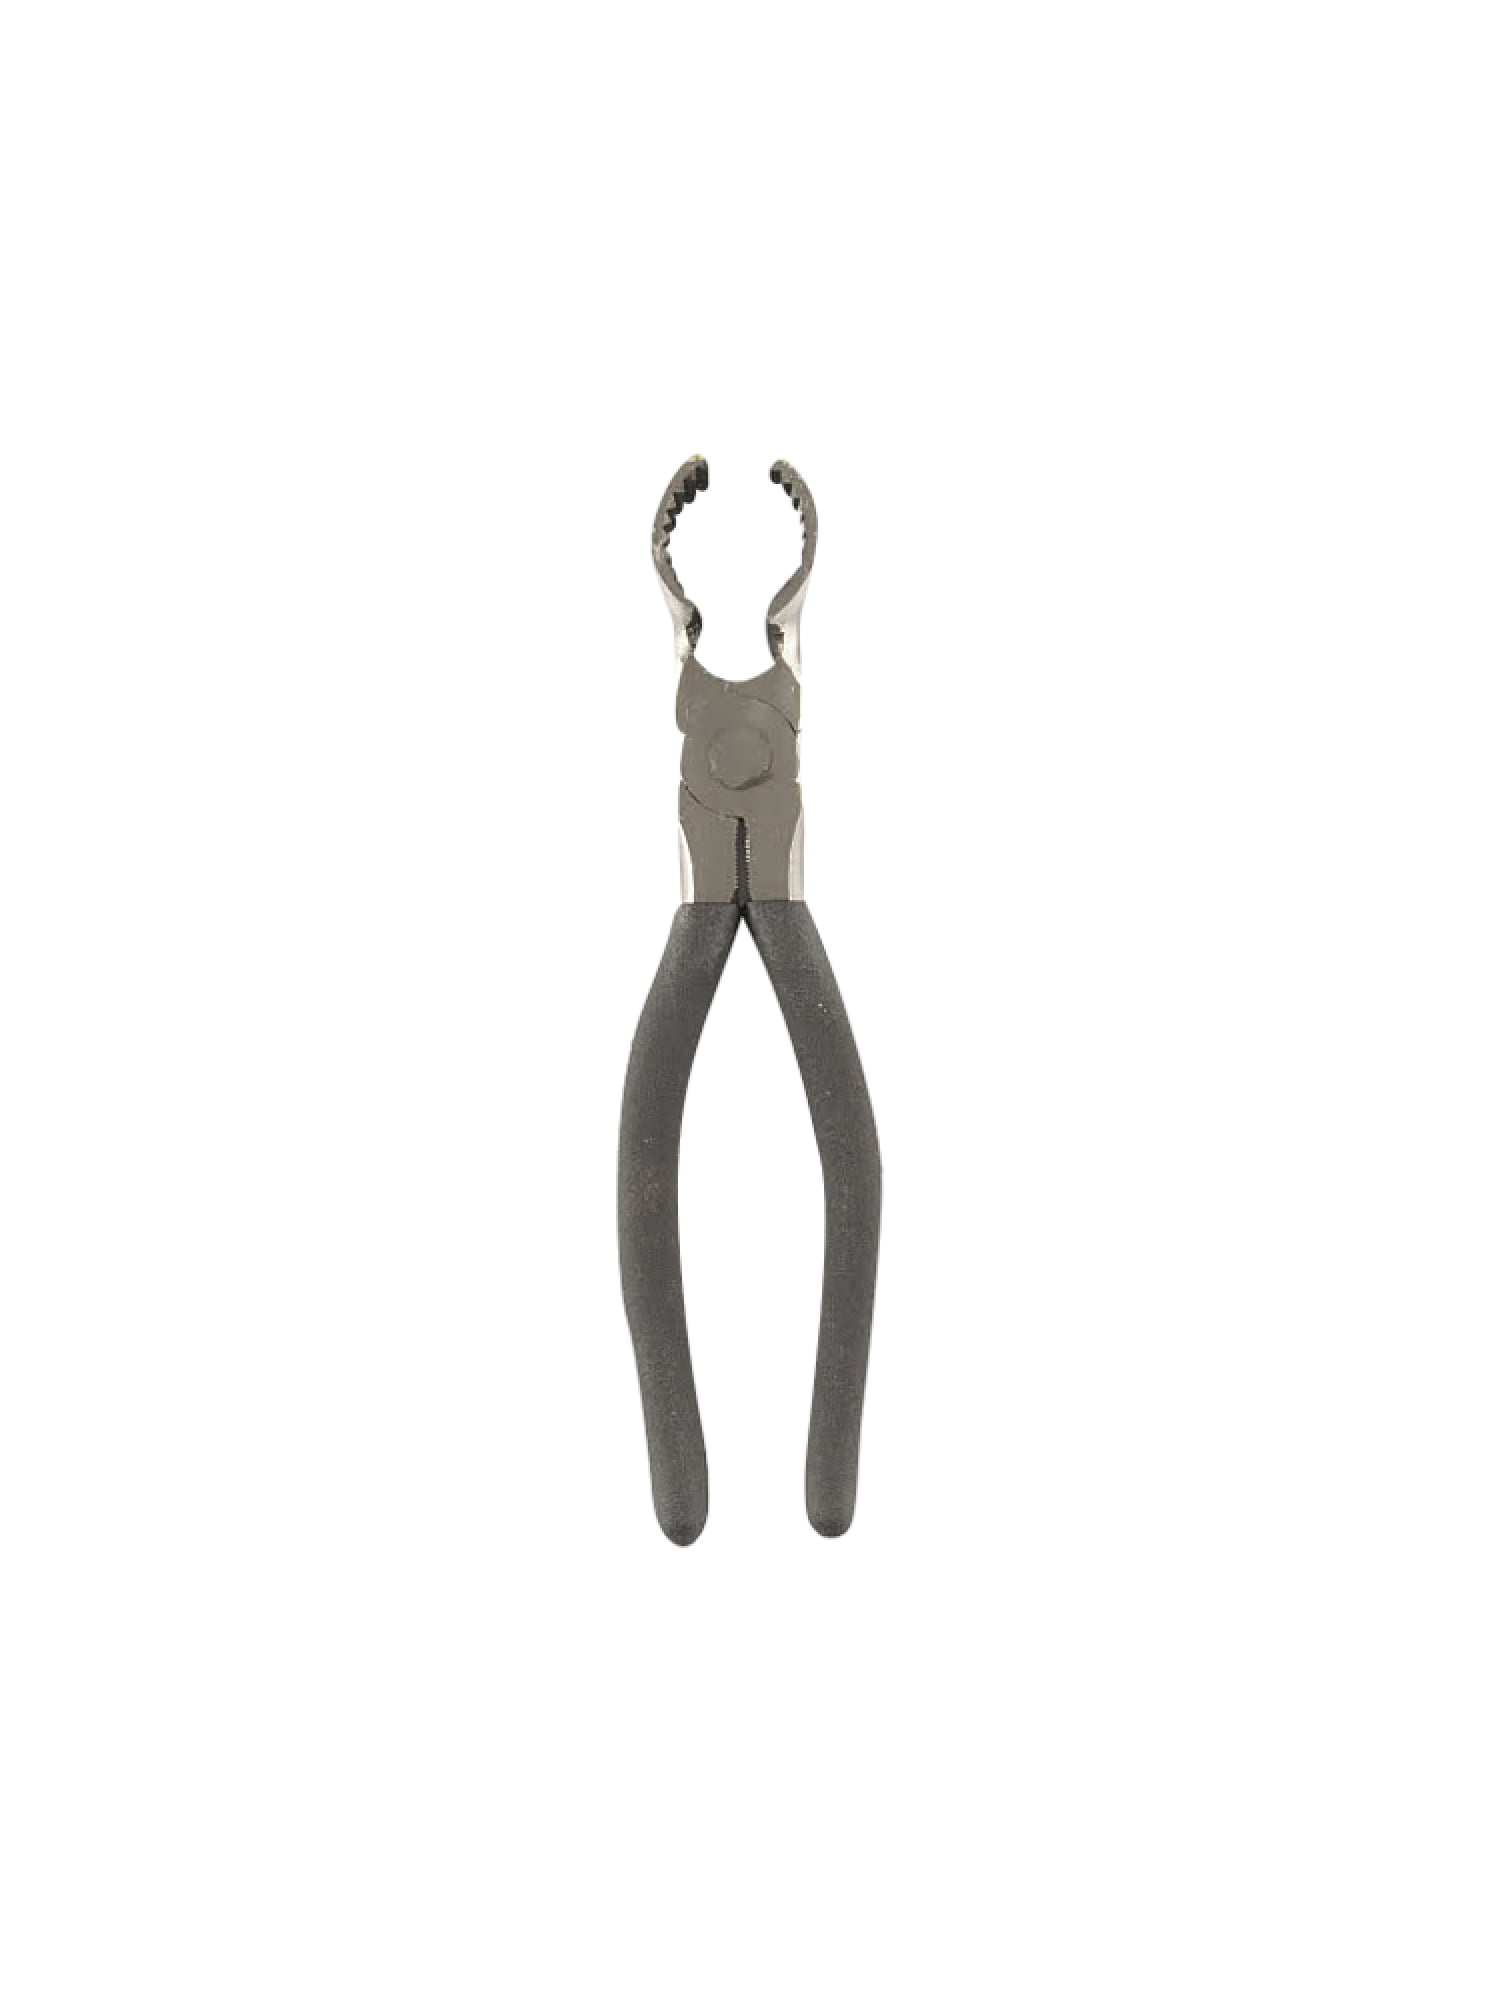 THP-1 ERP Replacement Hose Pliers NON-OEM THP-1 THP-1 